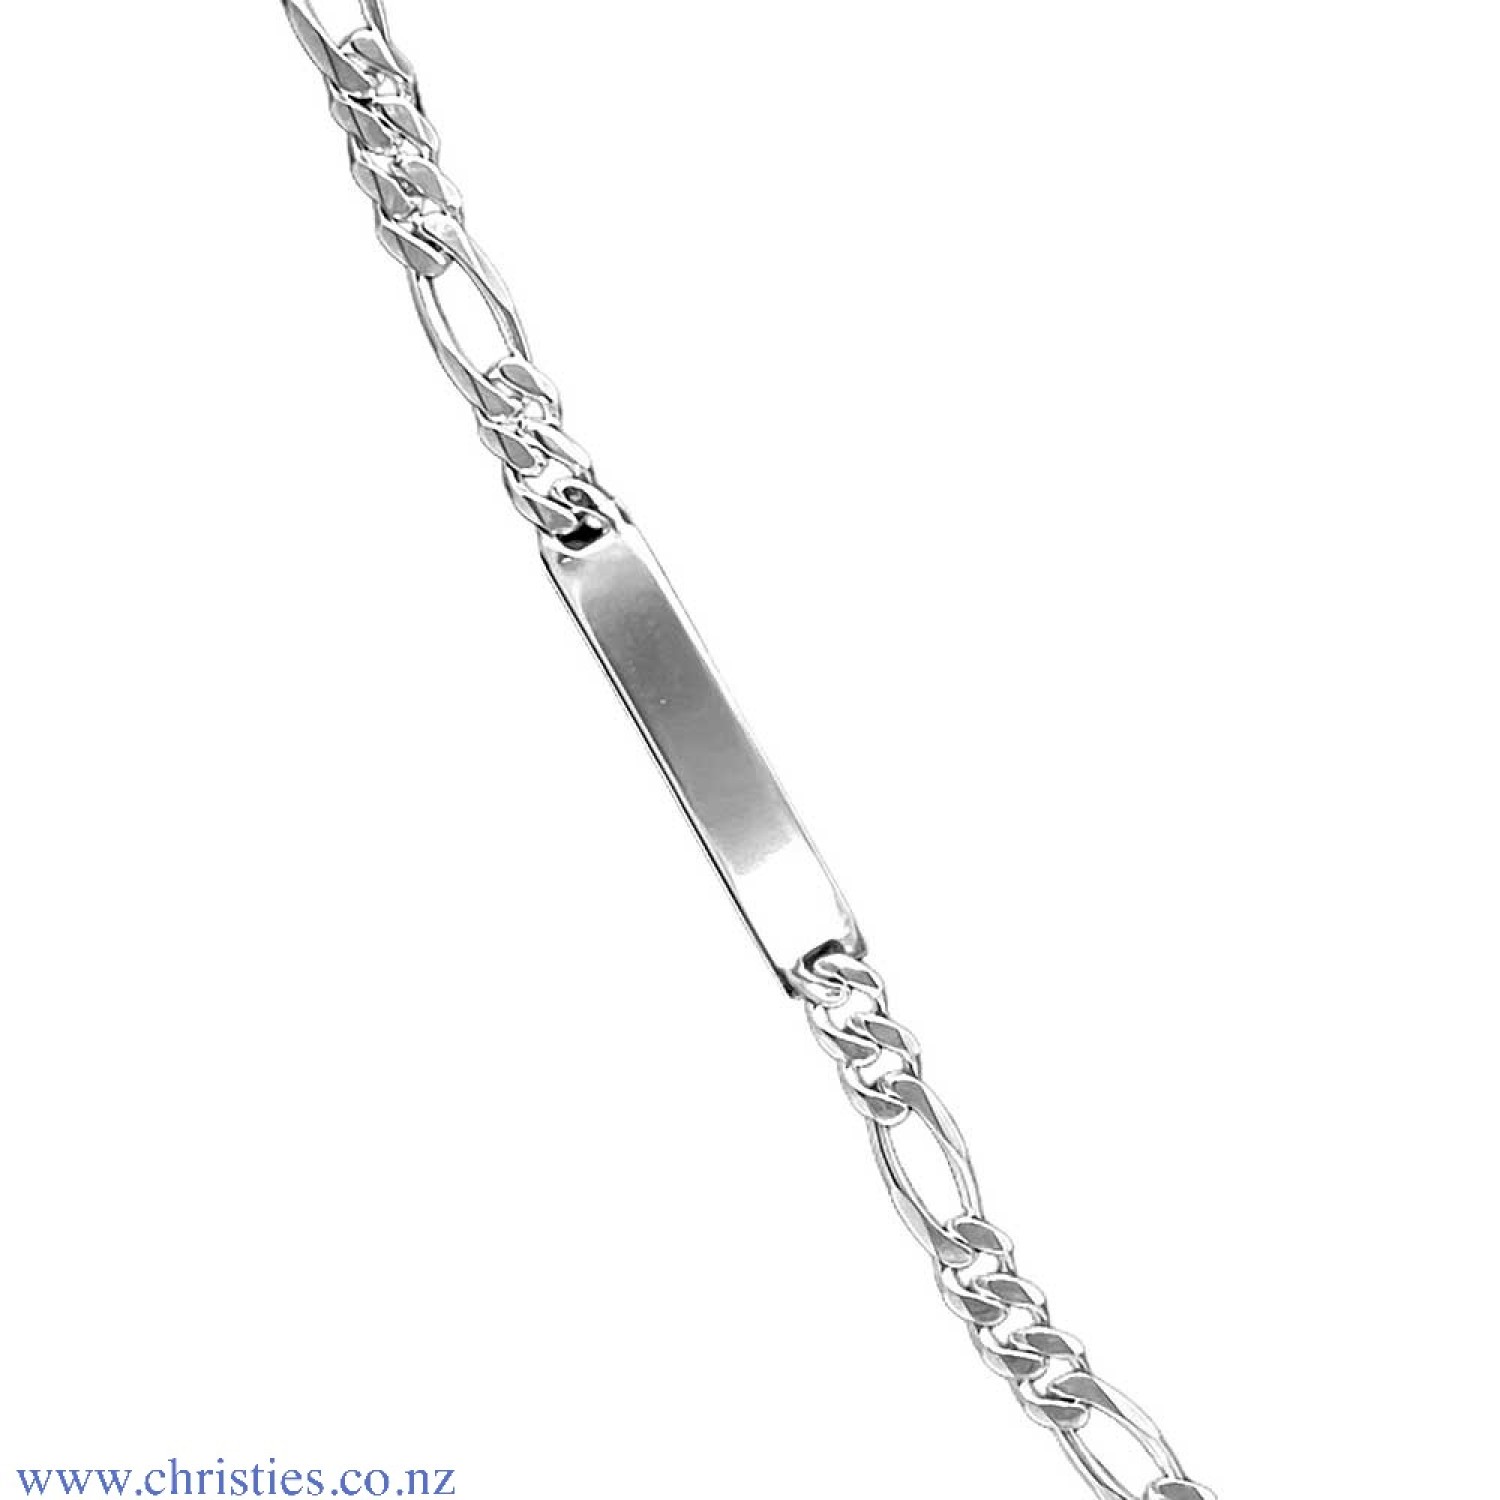 20627 Sterling Silver ID Figaro Medium Bracelet. Medium weight  Identification bracelet crafted in 925 sterling silver  Afterpay - Split your purchase into 4 instalments - Pay for your purchase over 4 instalments, due every two weeks. You’ll pay @christie